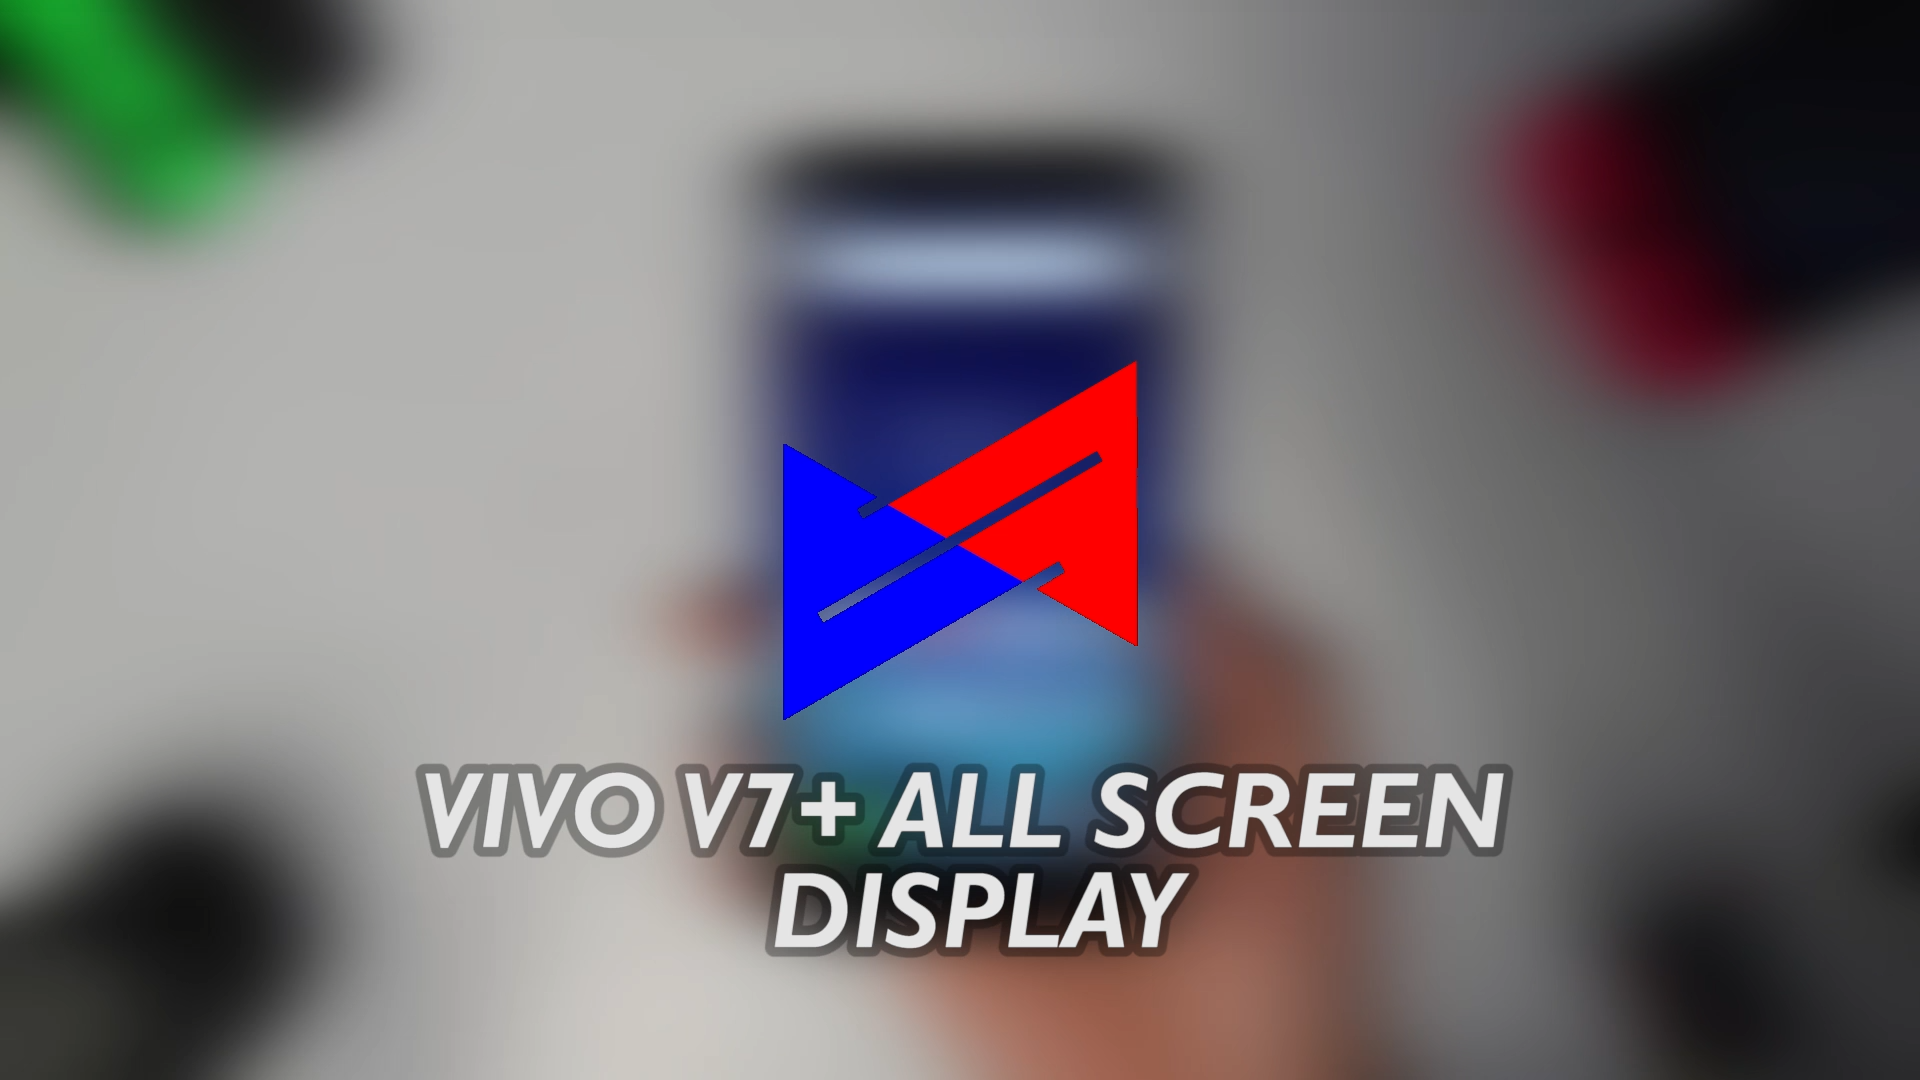 VIVO V7+ All Screen Display lives up to its hype!